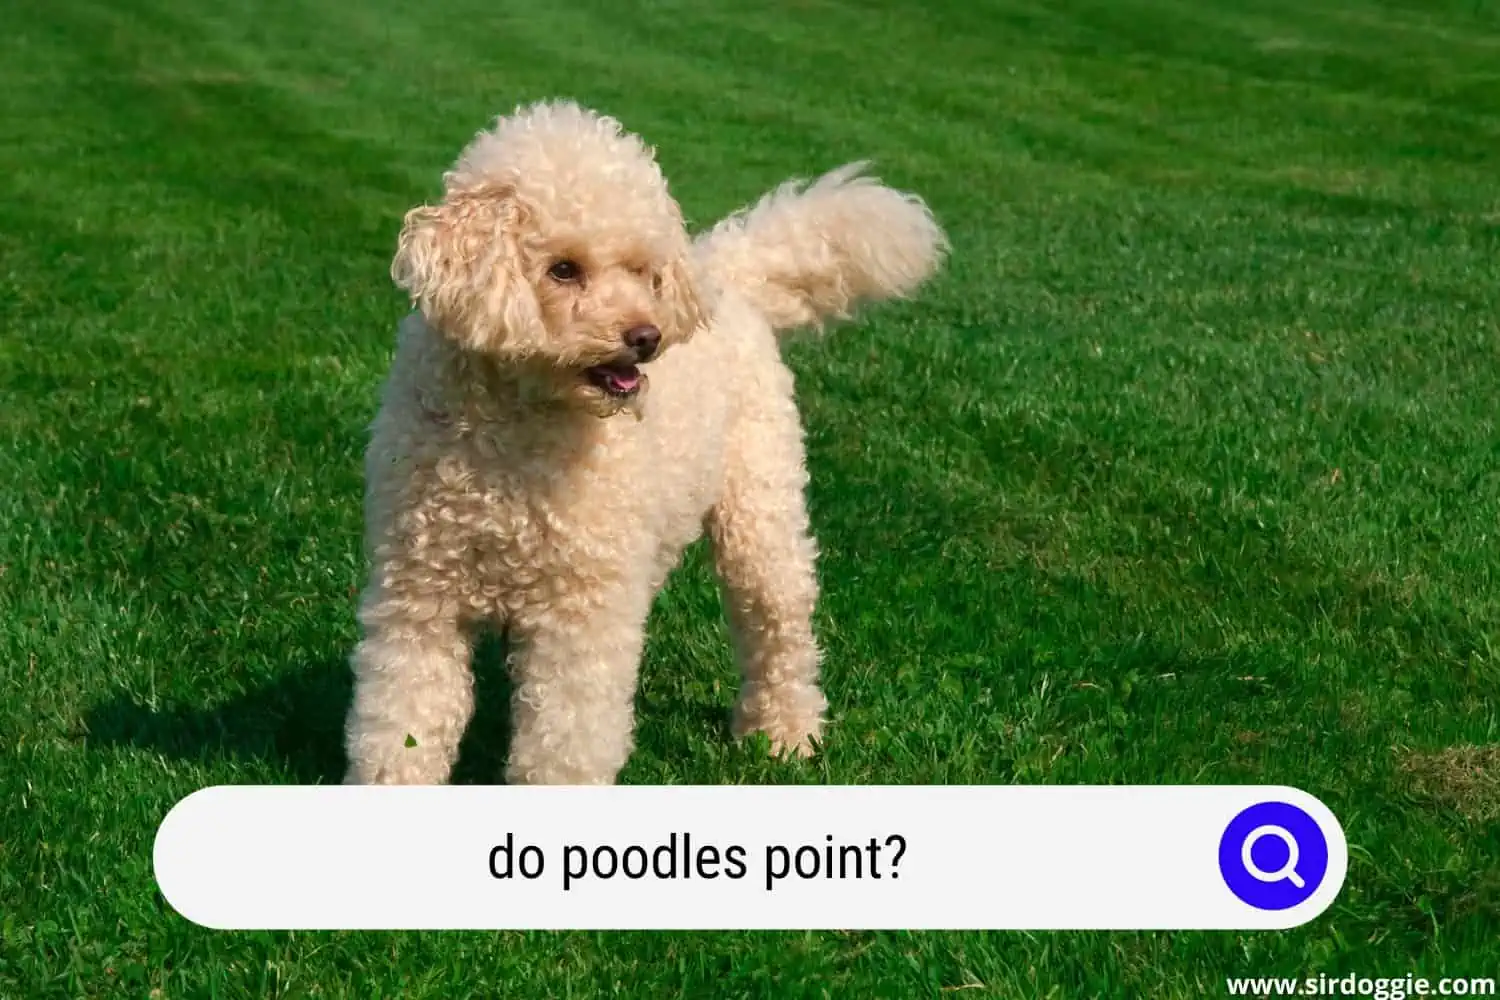 do poodles point